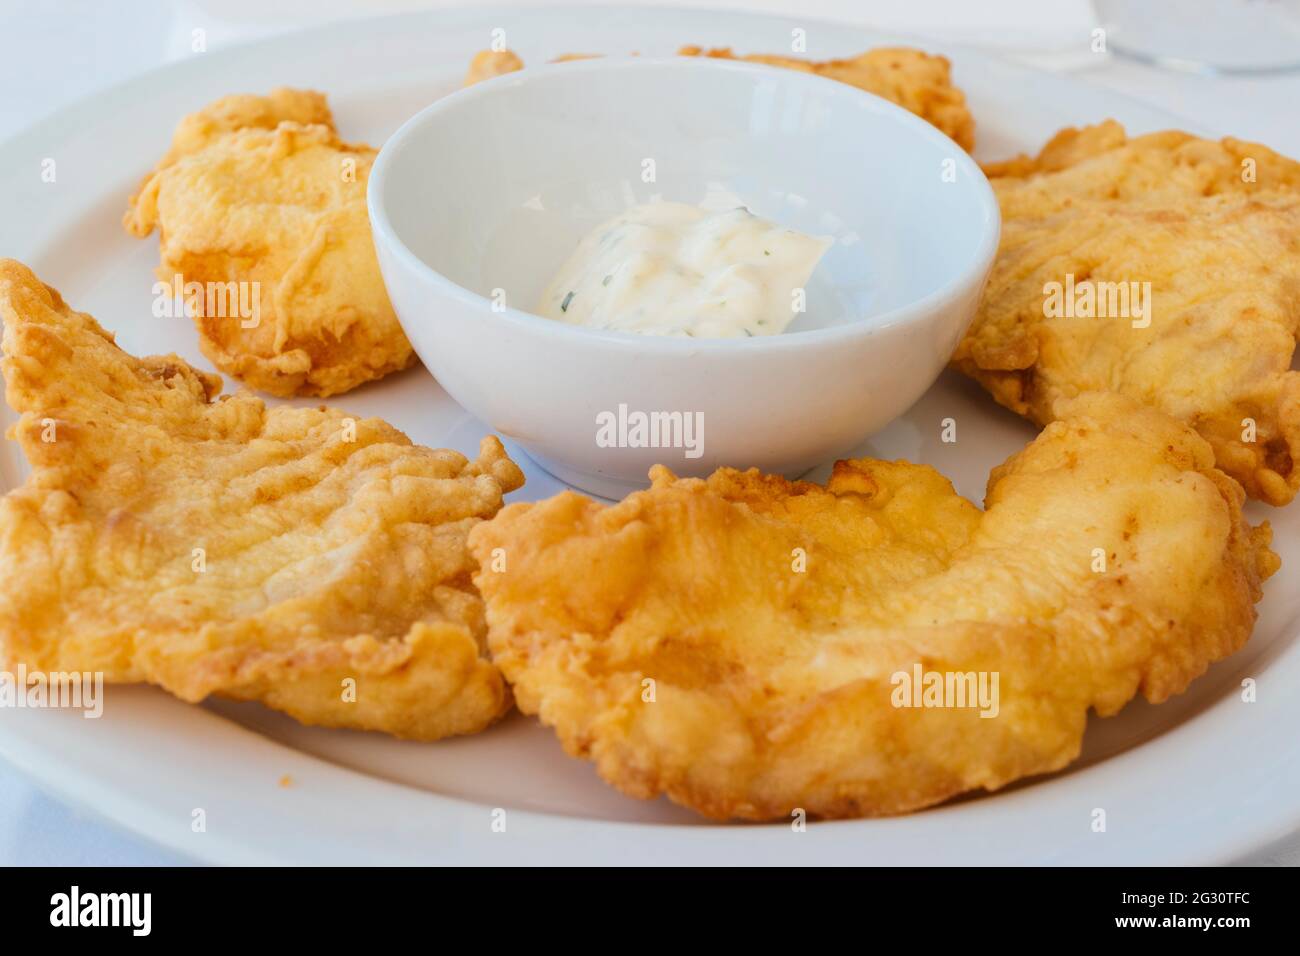 Typical Andalusian food. Rosada fried with aioli. With great popularity in Spain, La rosada, Genypterus blacodes, is not an indigenous fish, it is a s Stock Photo